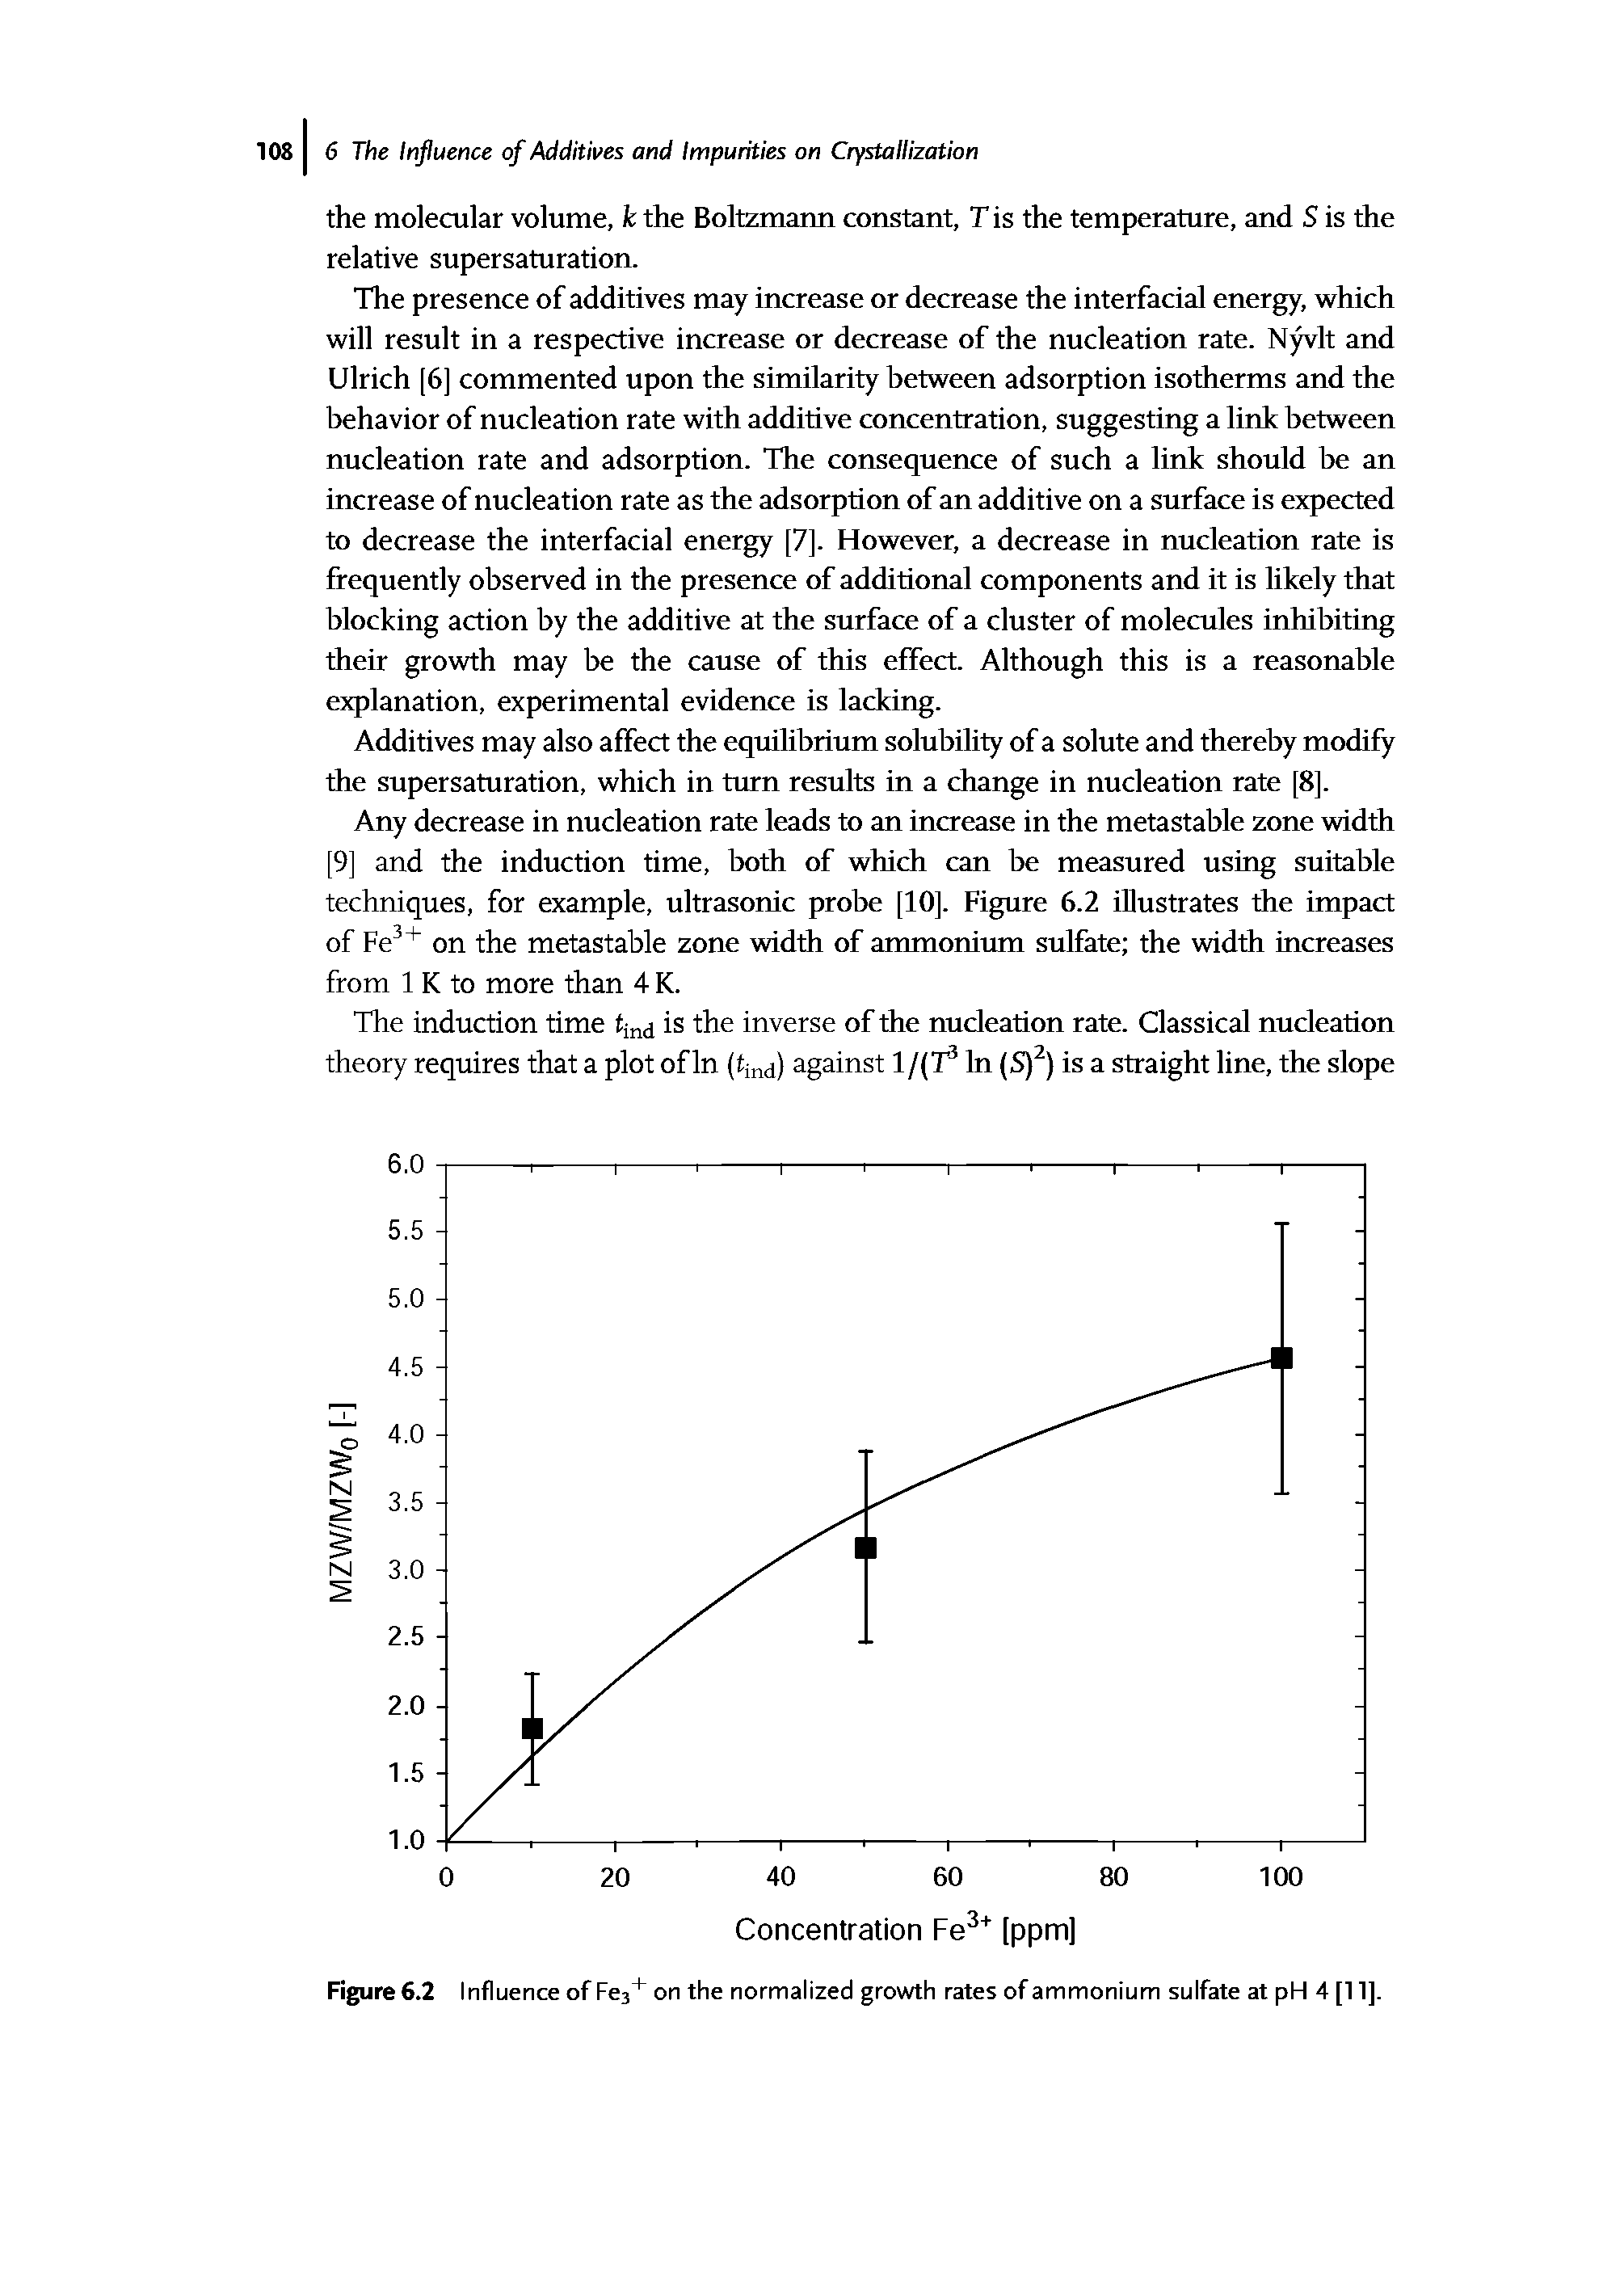 Figure 6.2 Influence of Fes on the normalized growth rates of ammonium sulfate at pH 4 [11].